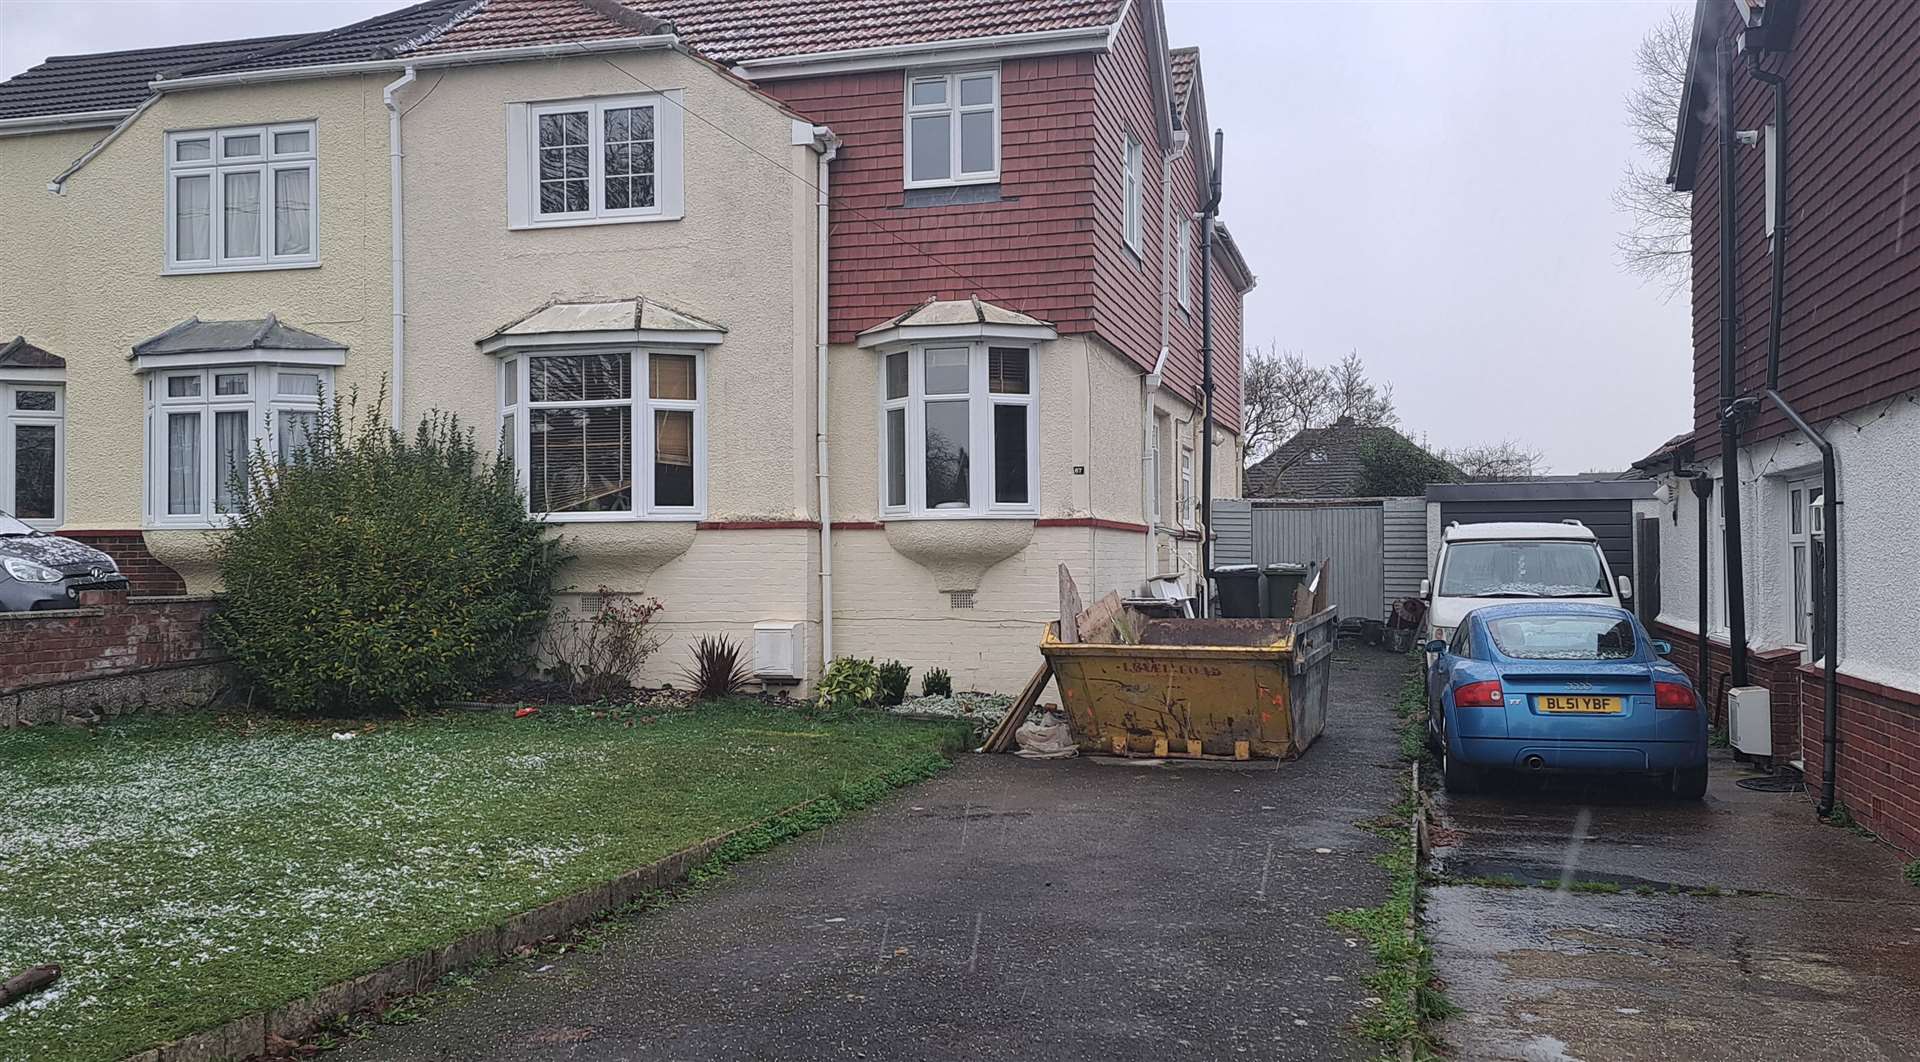 The building with a skip on the driveway is the one earmarked for a children's home